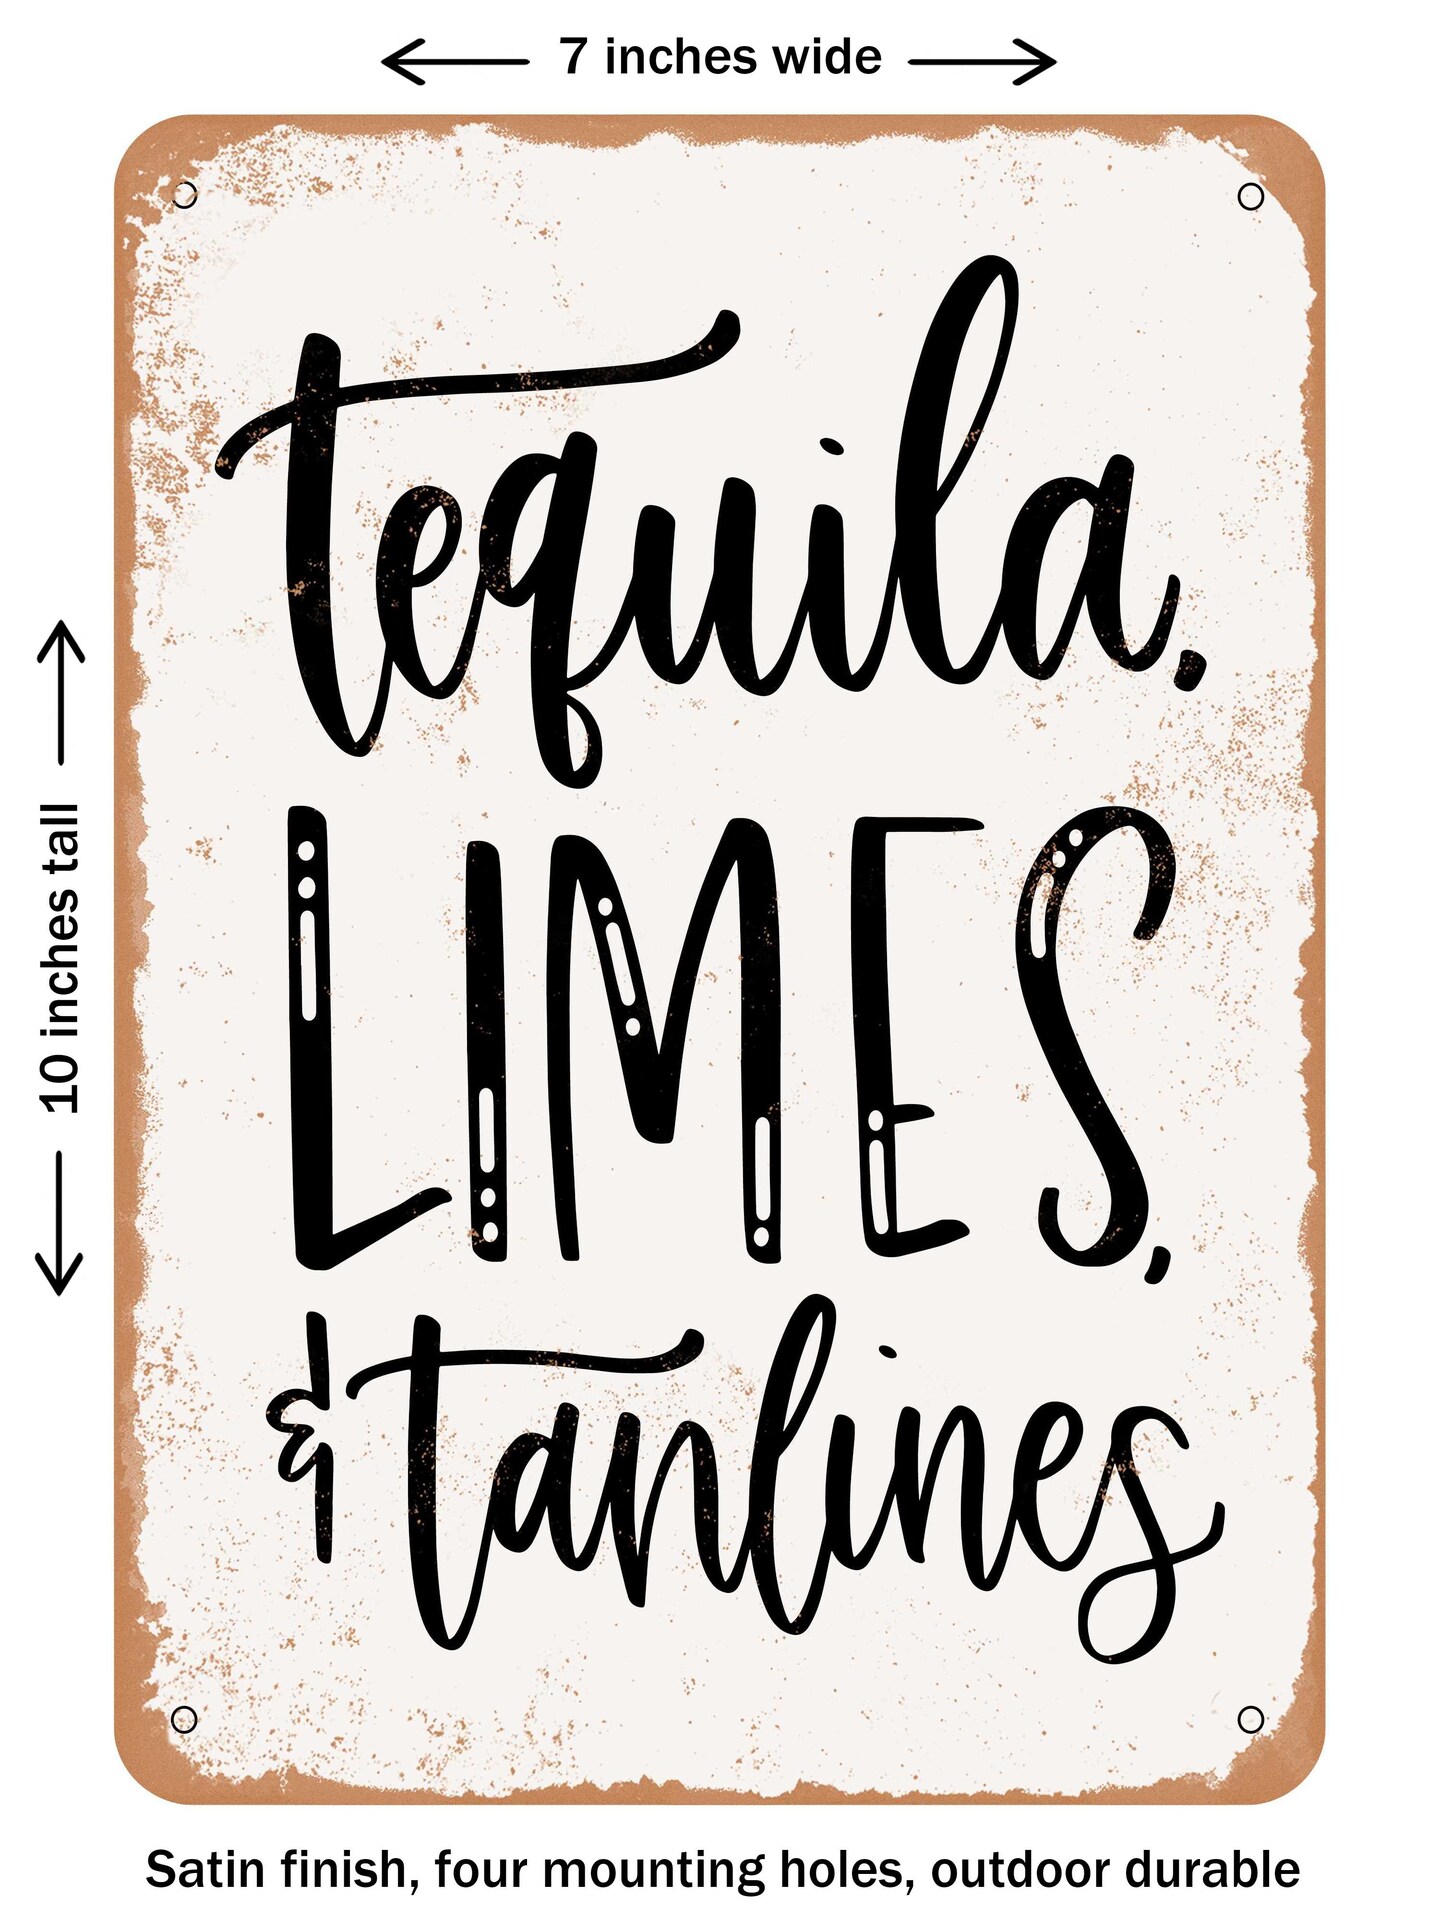 Decorative Metal Sign Tequila Limes Tanlines Vintage Rusty Look 5152